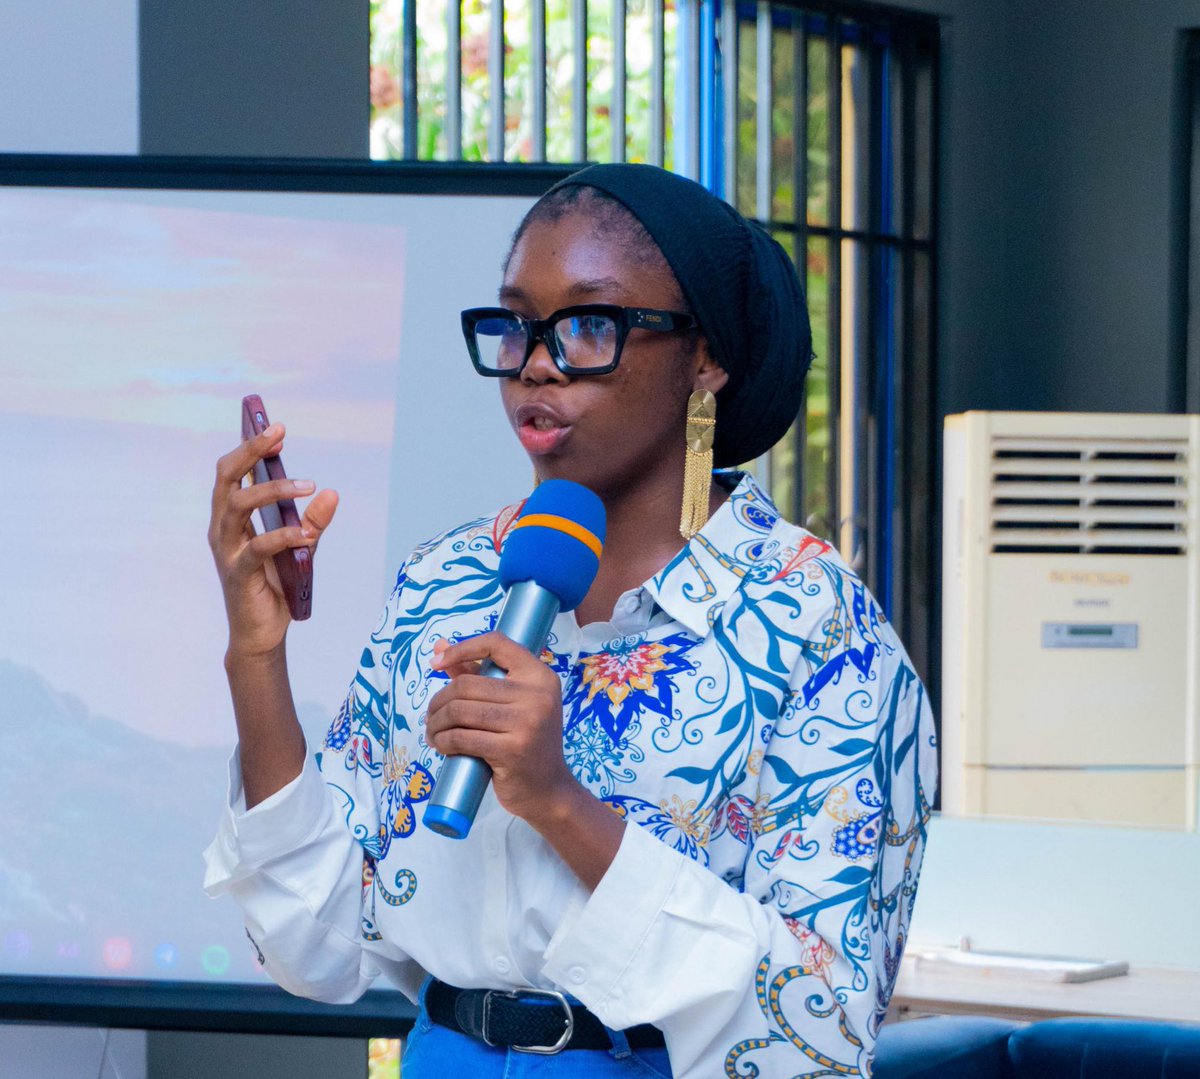 It is easier to build a personal brand than a company’s page. 

It is easier to leverage your personal brand to drive attention your company's page. 

Your No1 brand influencer should be YOU

📸 throwback to @hernovate workshop in March